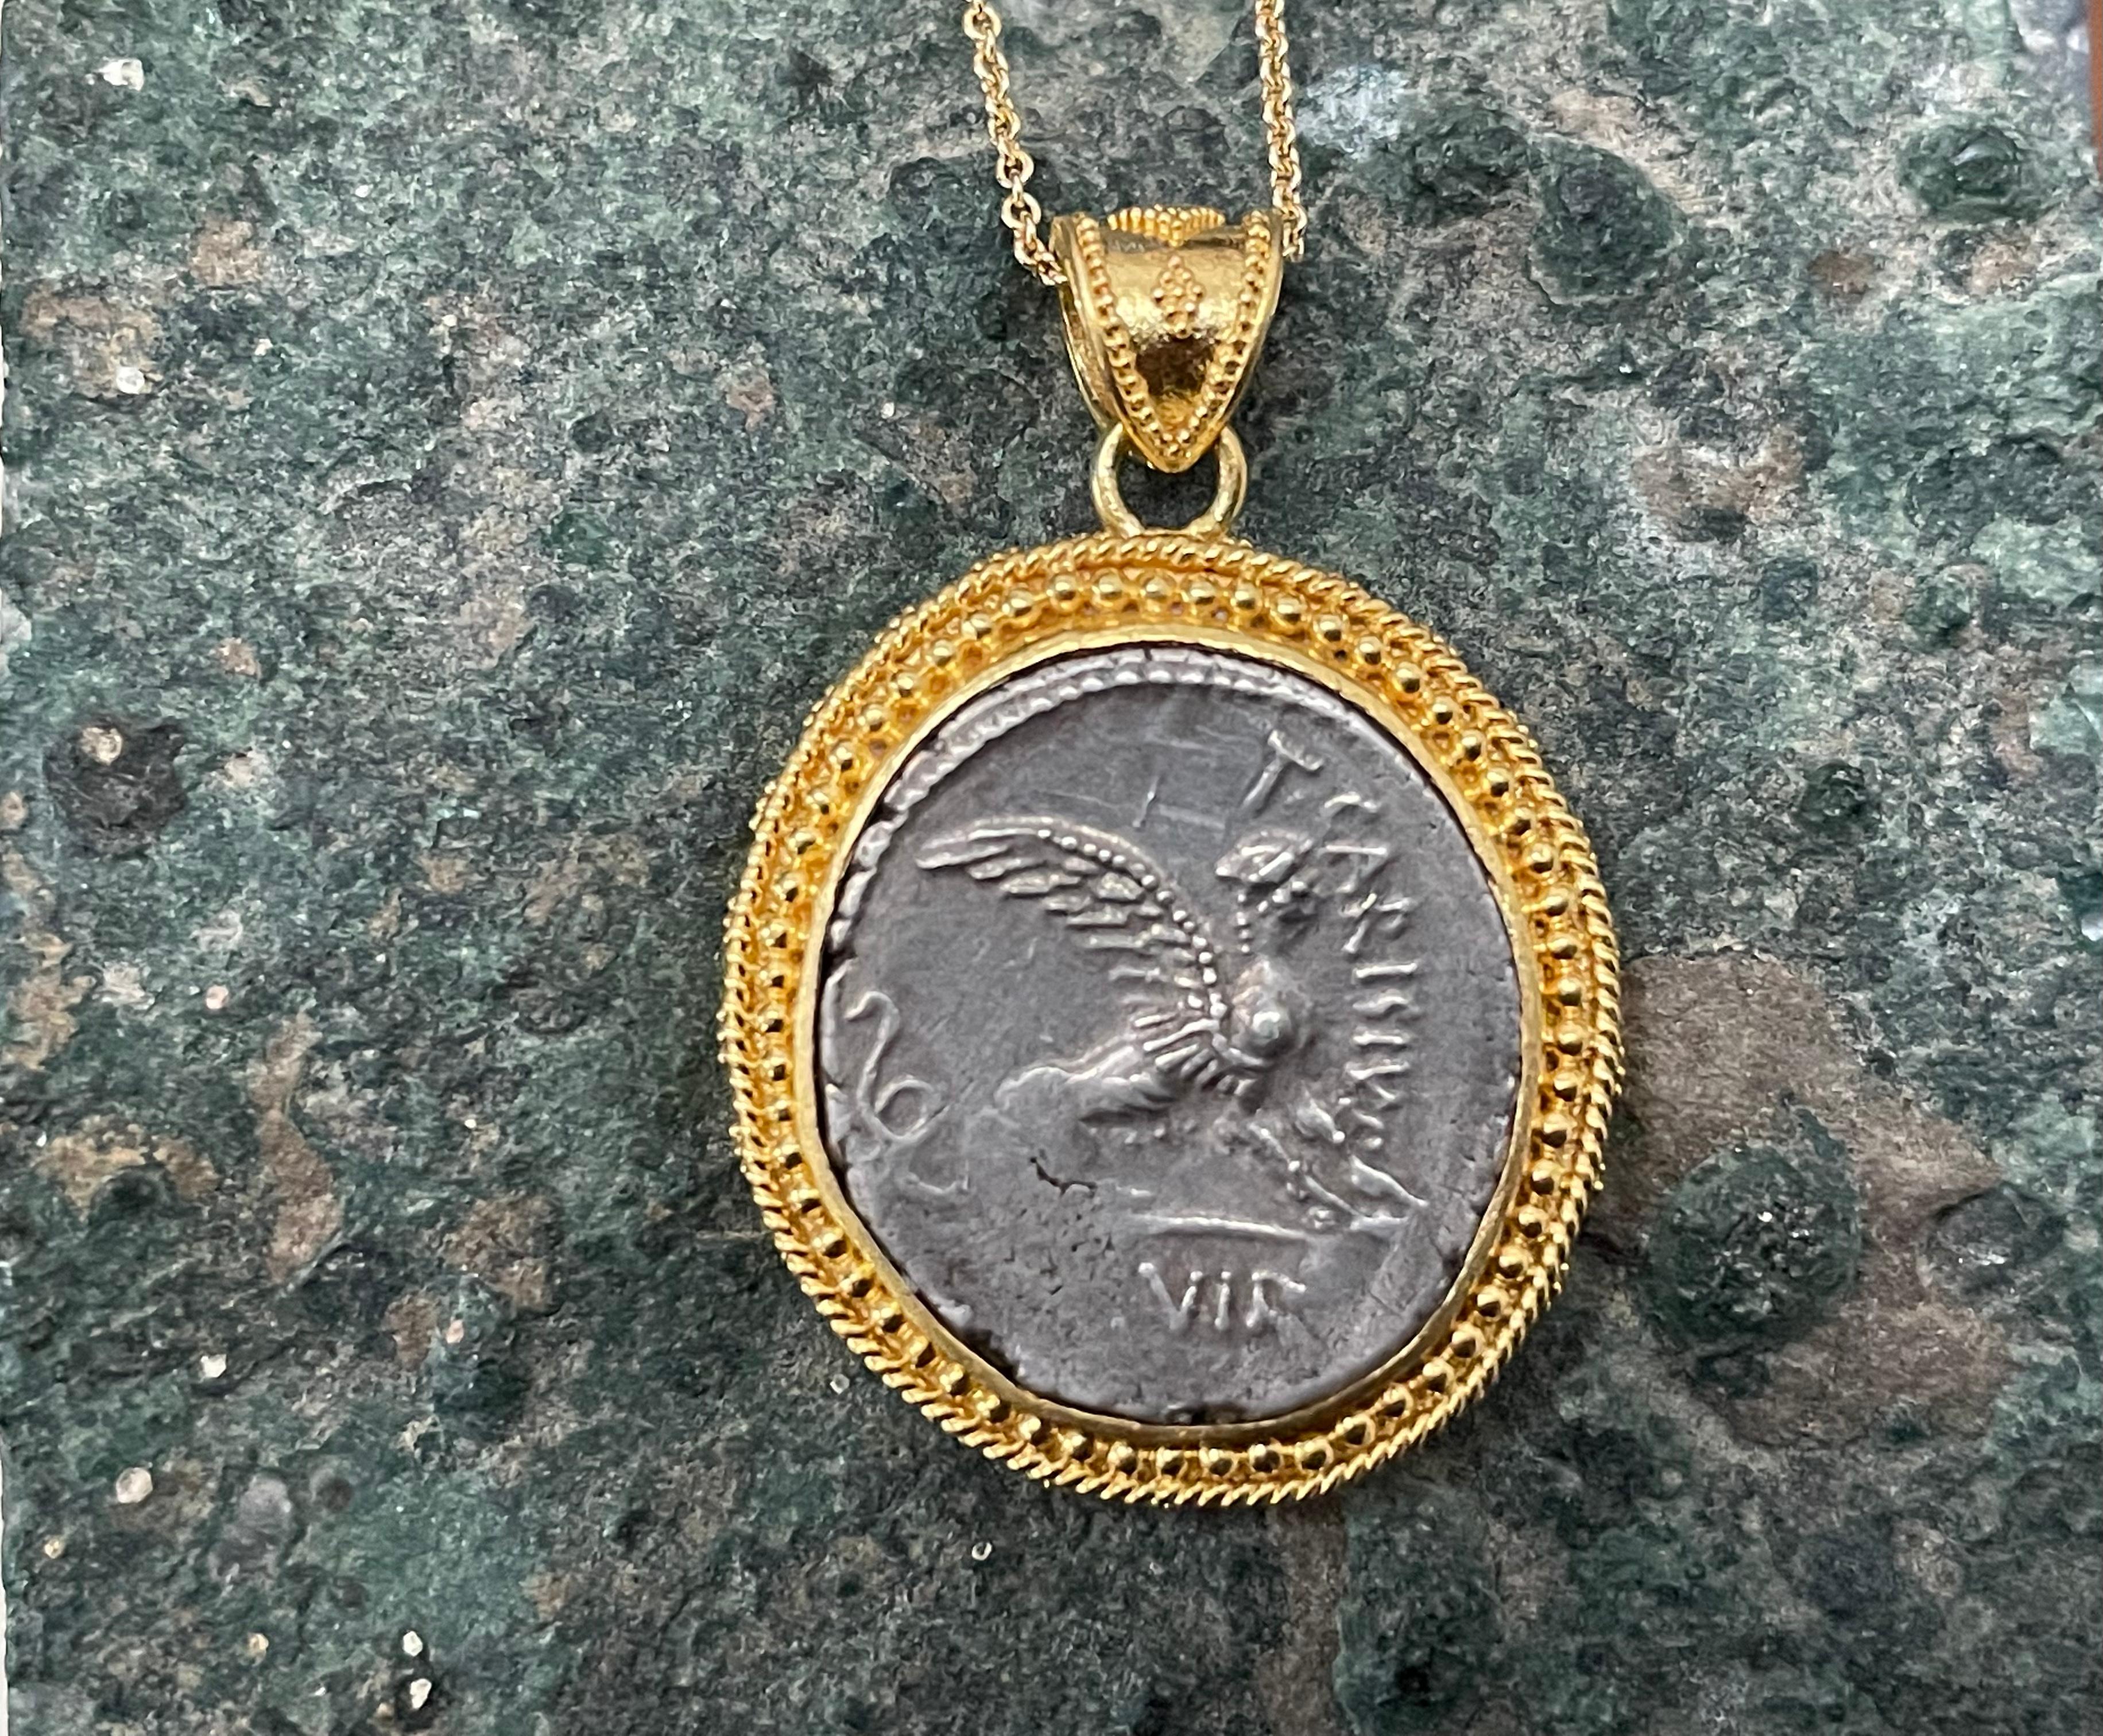 A rare and seldom seen Roman Republican Denarius from 46 BC featuring an Egyptian Sphinx is displayed in an exquisitely granulated Steven Battelle designed setting created by a master goldsmith.  

The Romans were awed by the Egyptian monuments and